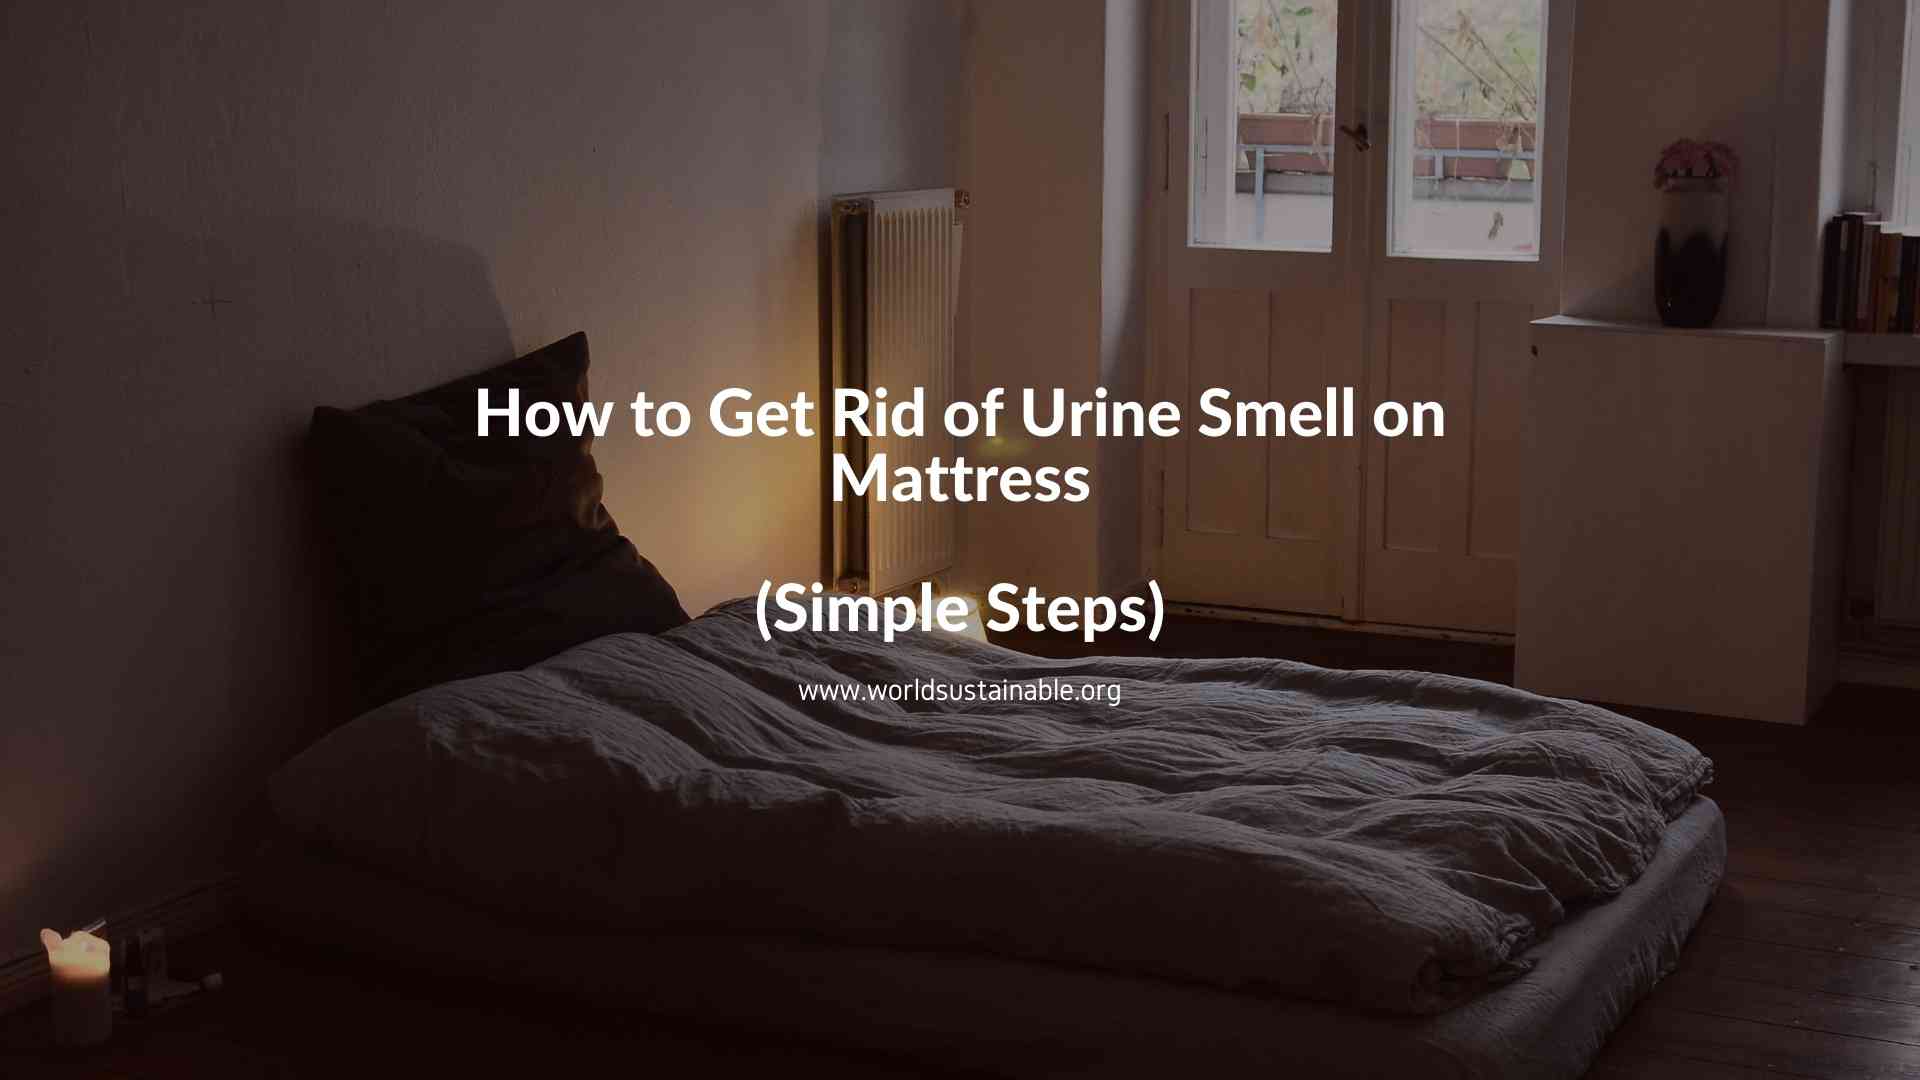 How to Get Rid of Urine Smell on Mattress: 11 Ways ...